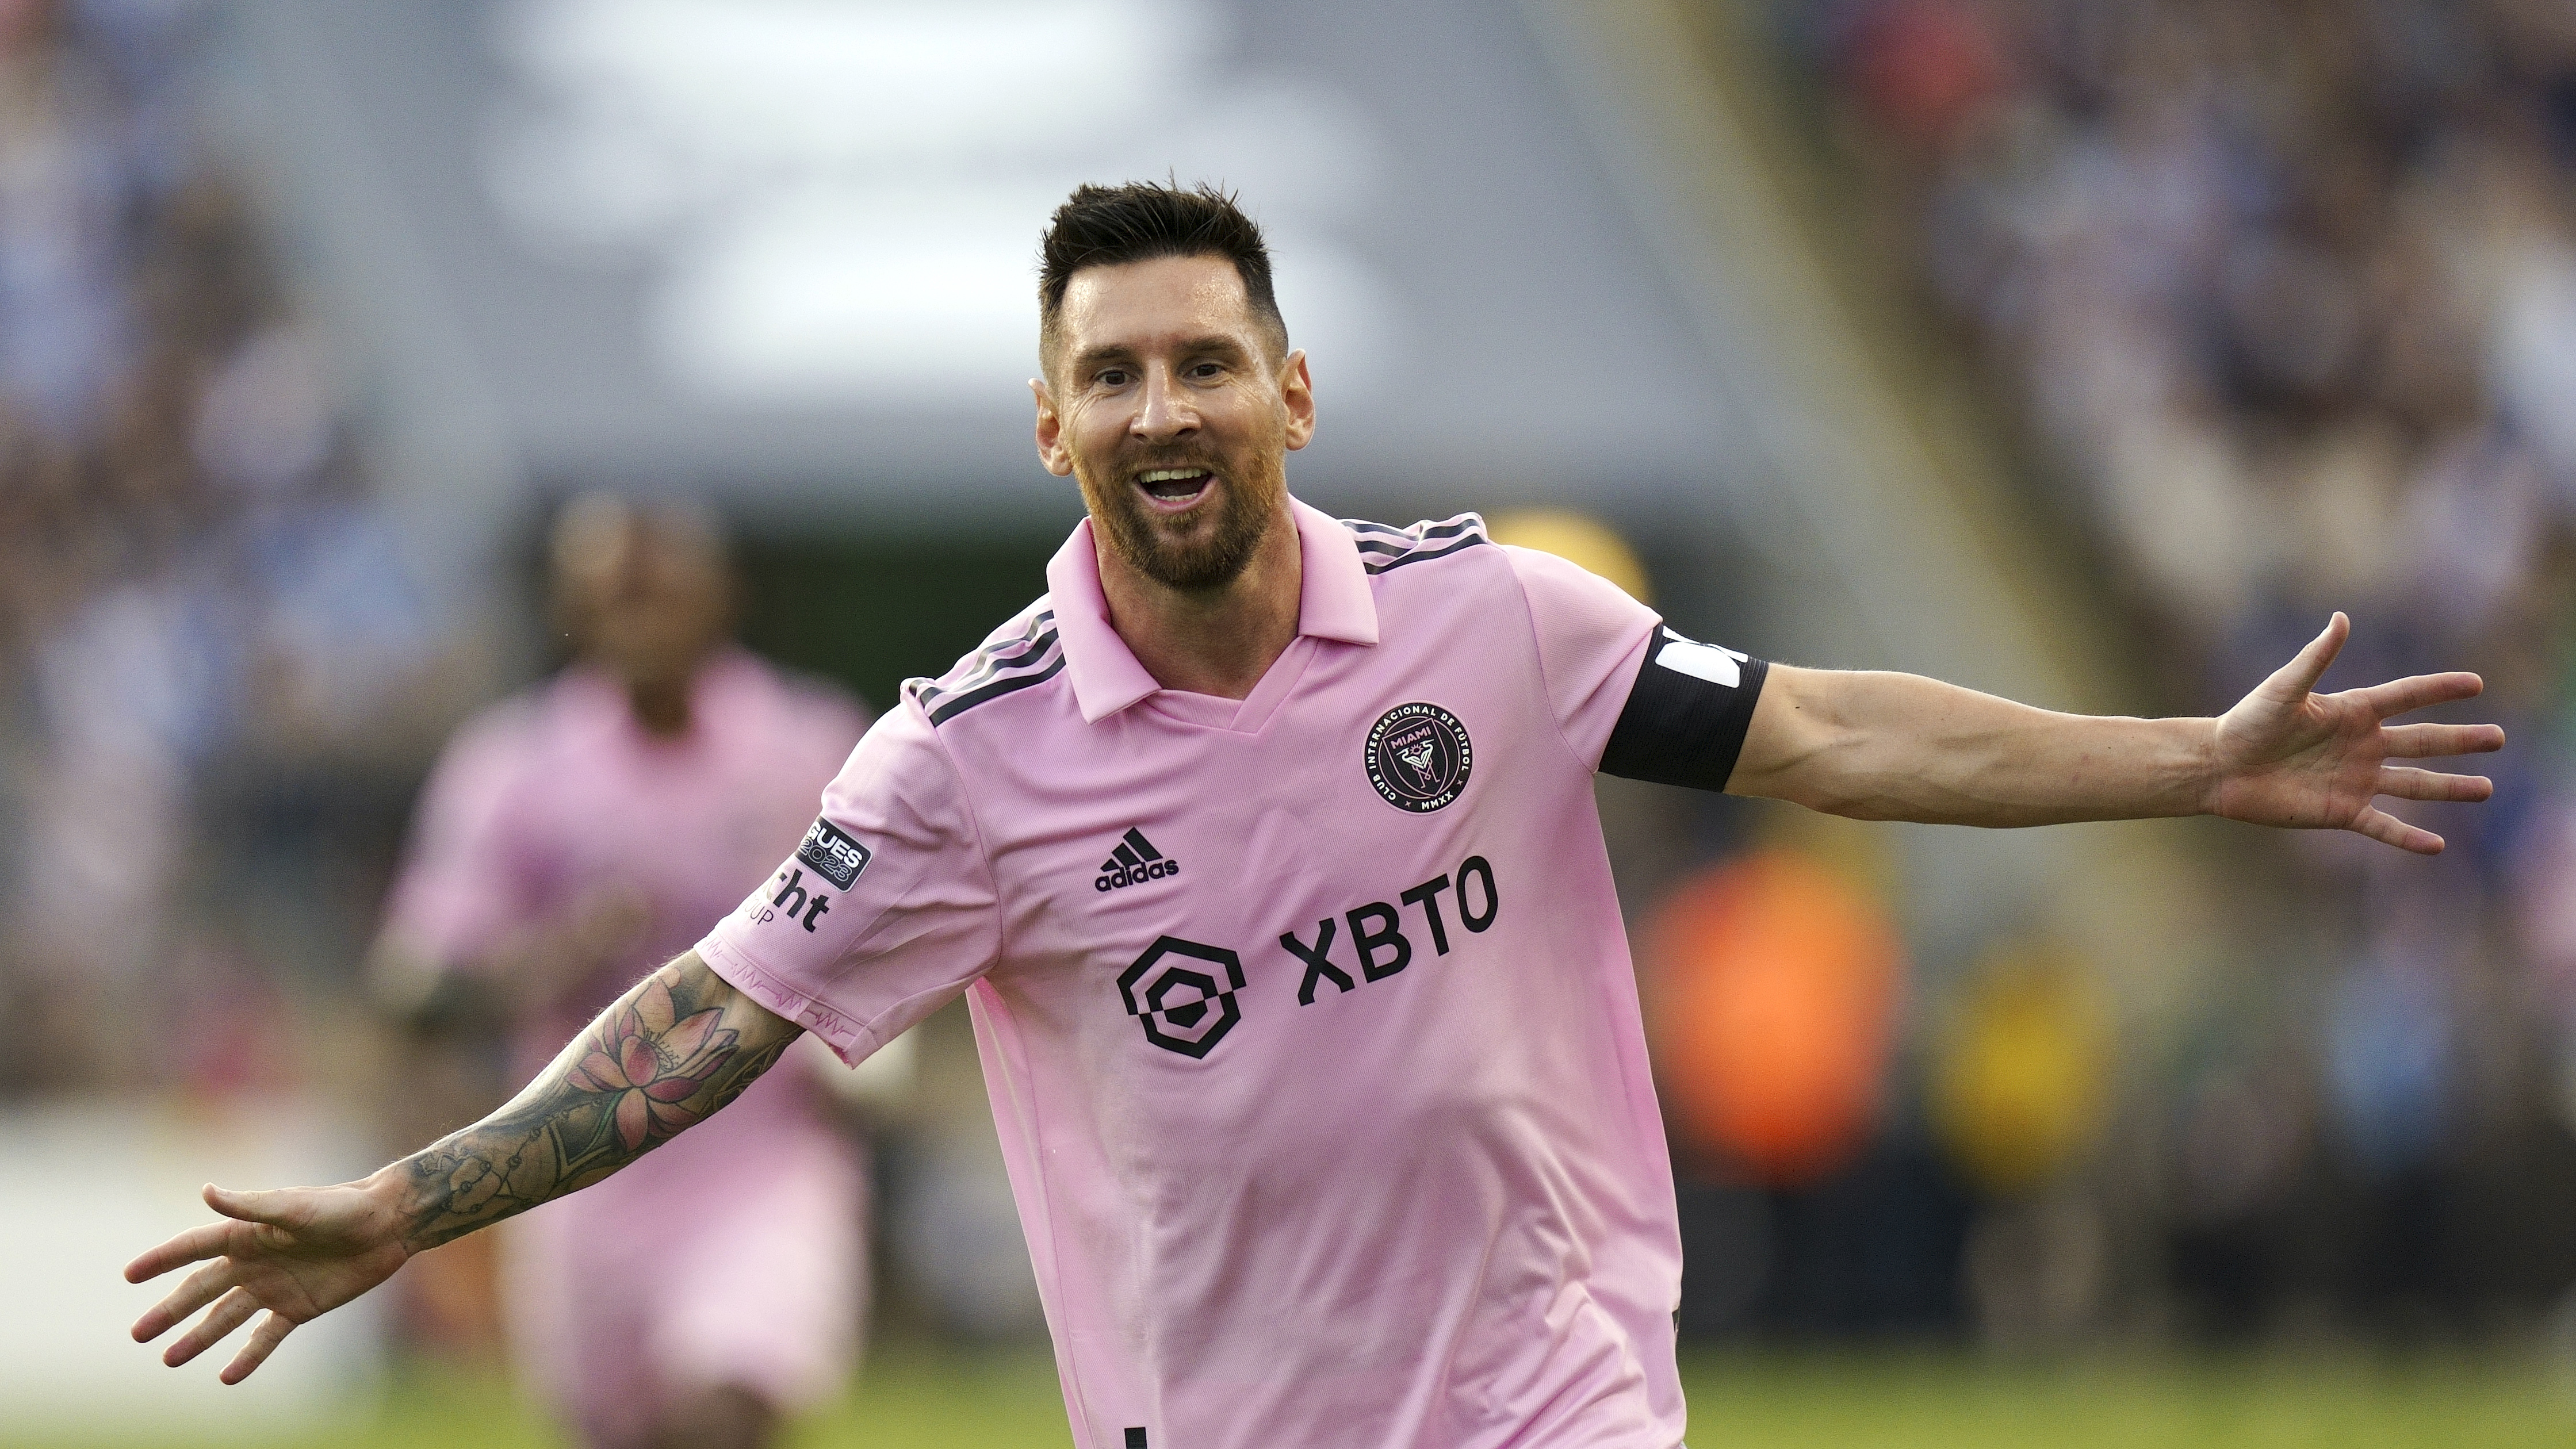 Celebrity Soccer Player Lionel Messi is in Hoboken This Weekend